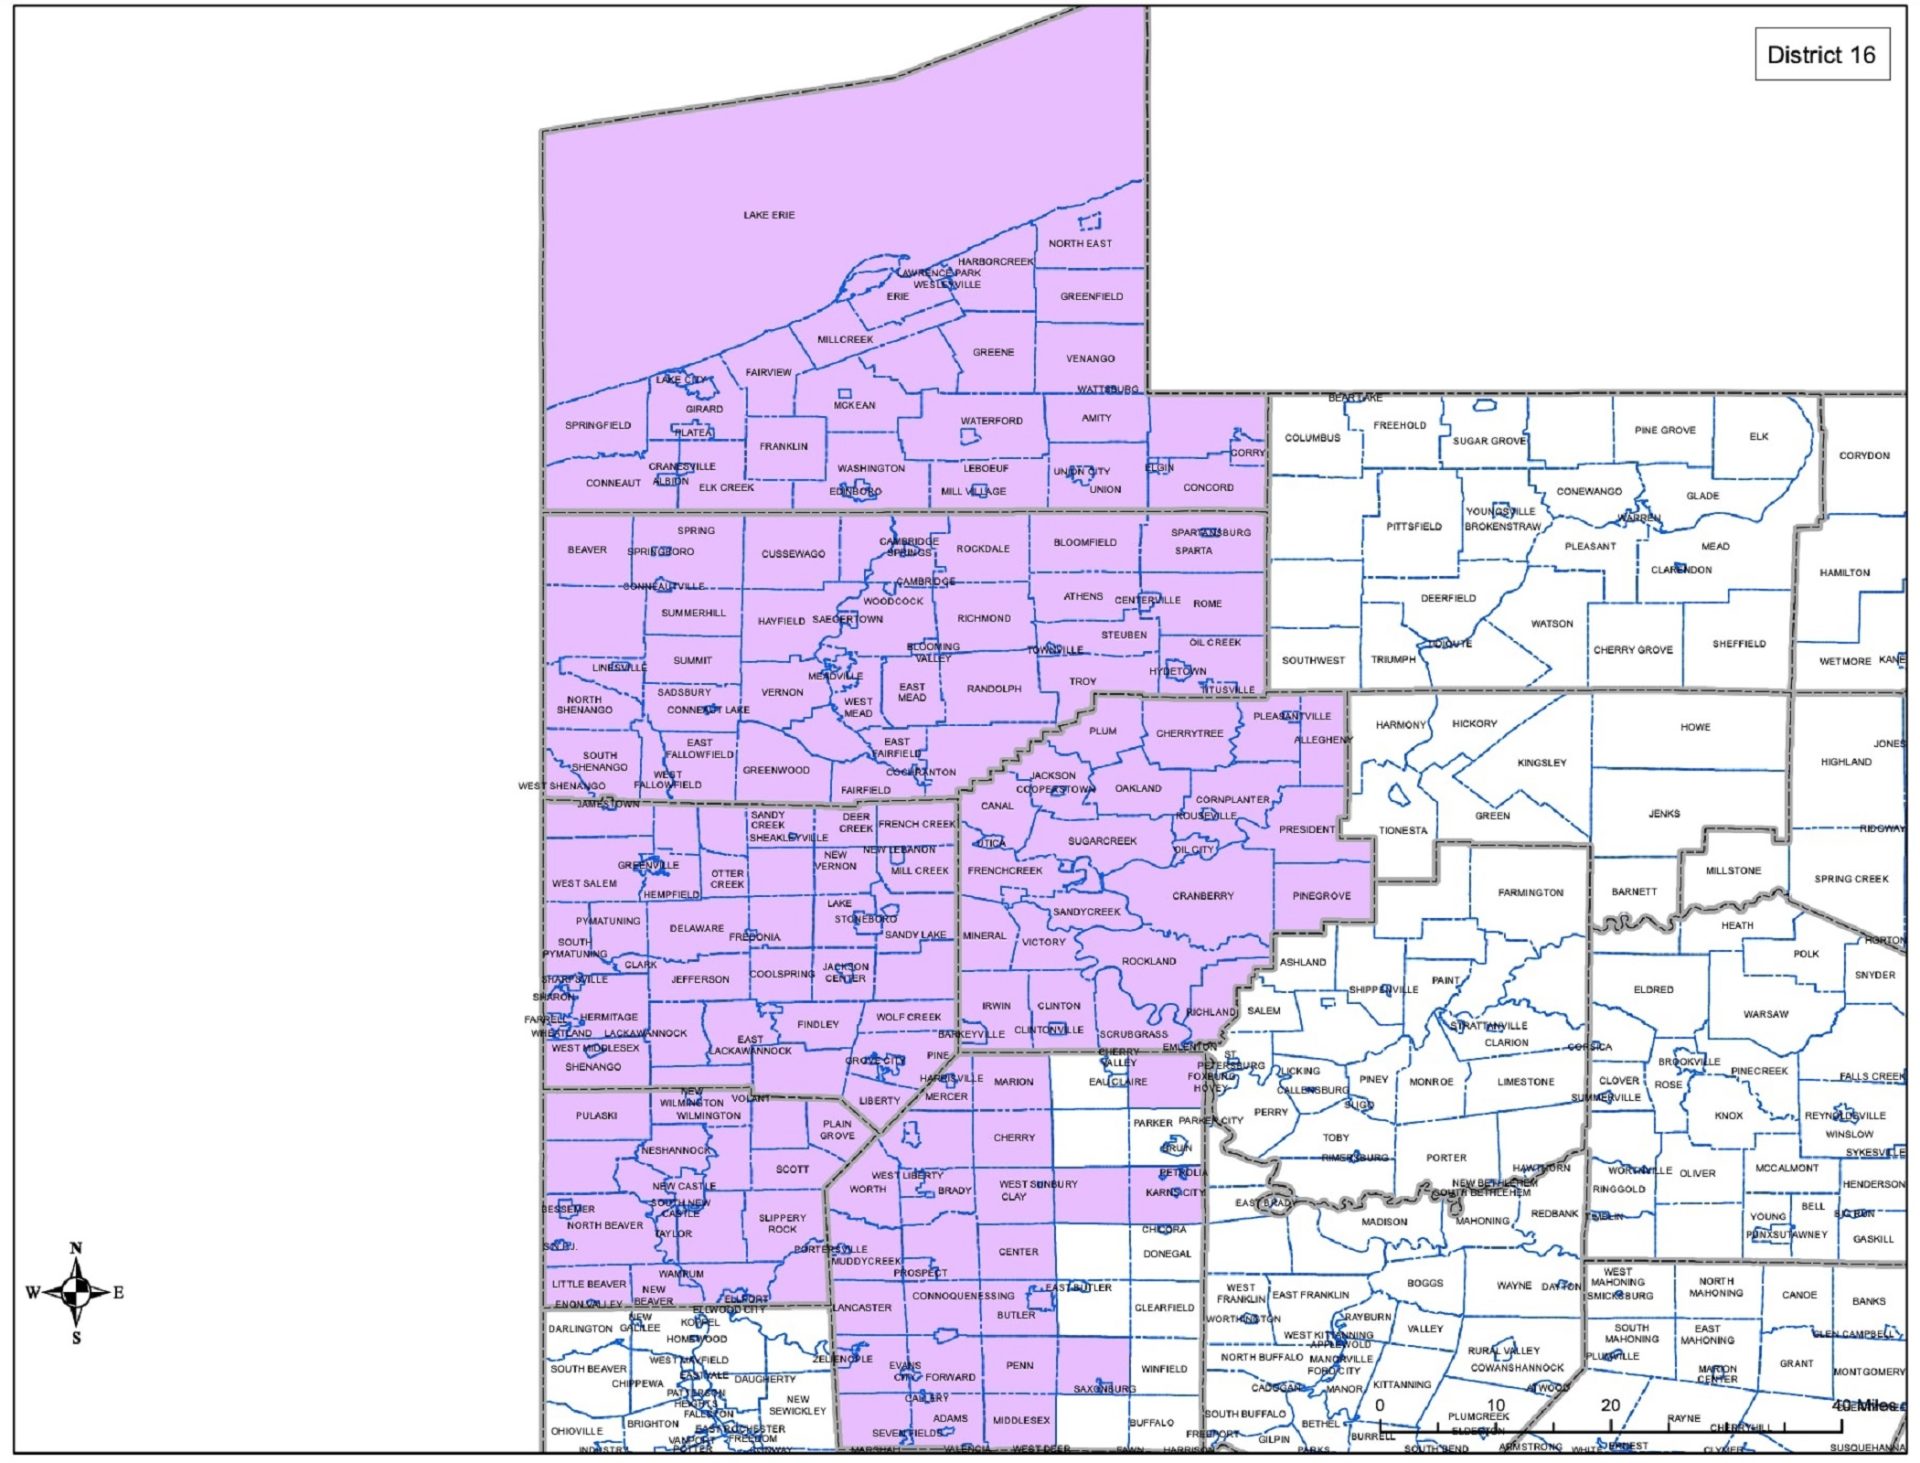 Proposed District 16 groups together six counties, keeping five completely intact and the majority of the sixth together. Its boundaries also follow municipal and precinct lines.